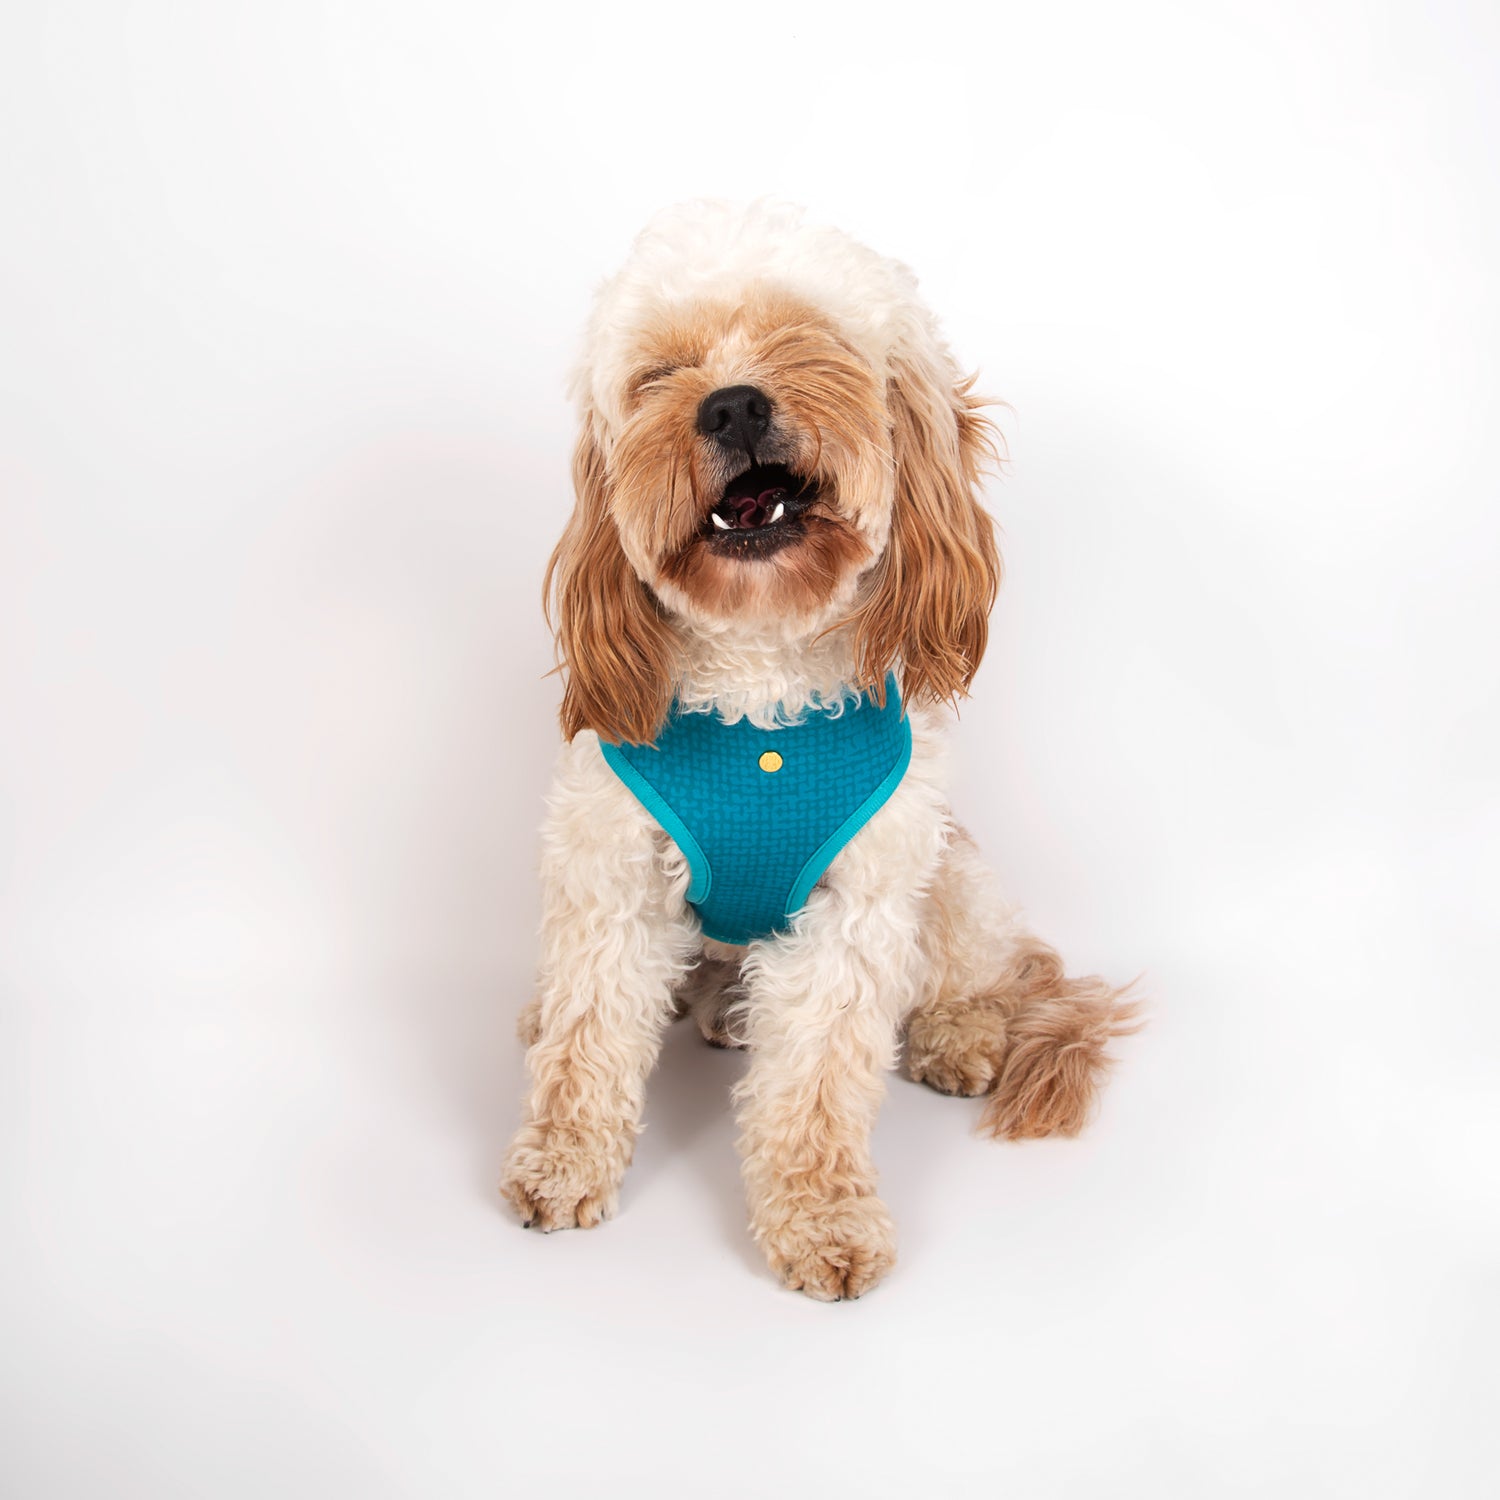 Pata Paw swiss alps harness as seen in a medium-sized dog. Reverse design showing a timeless and chic texture pattern in teal.